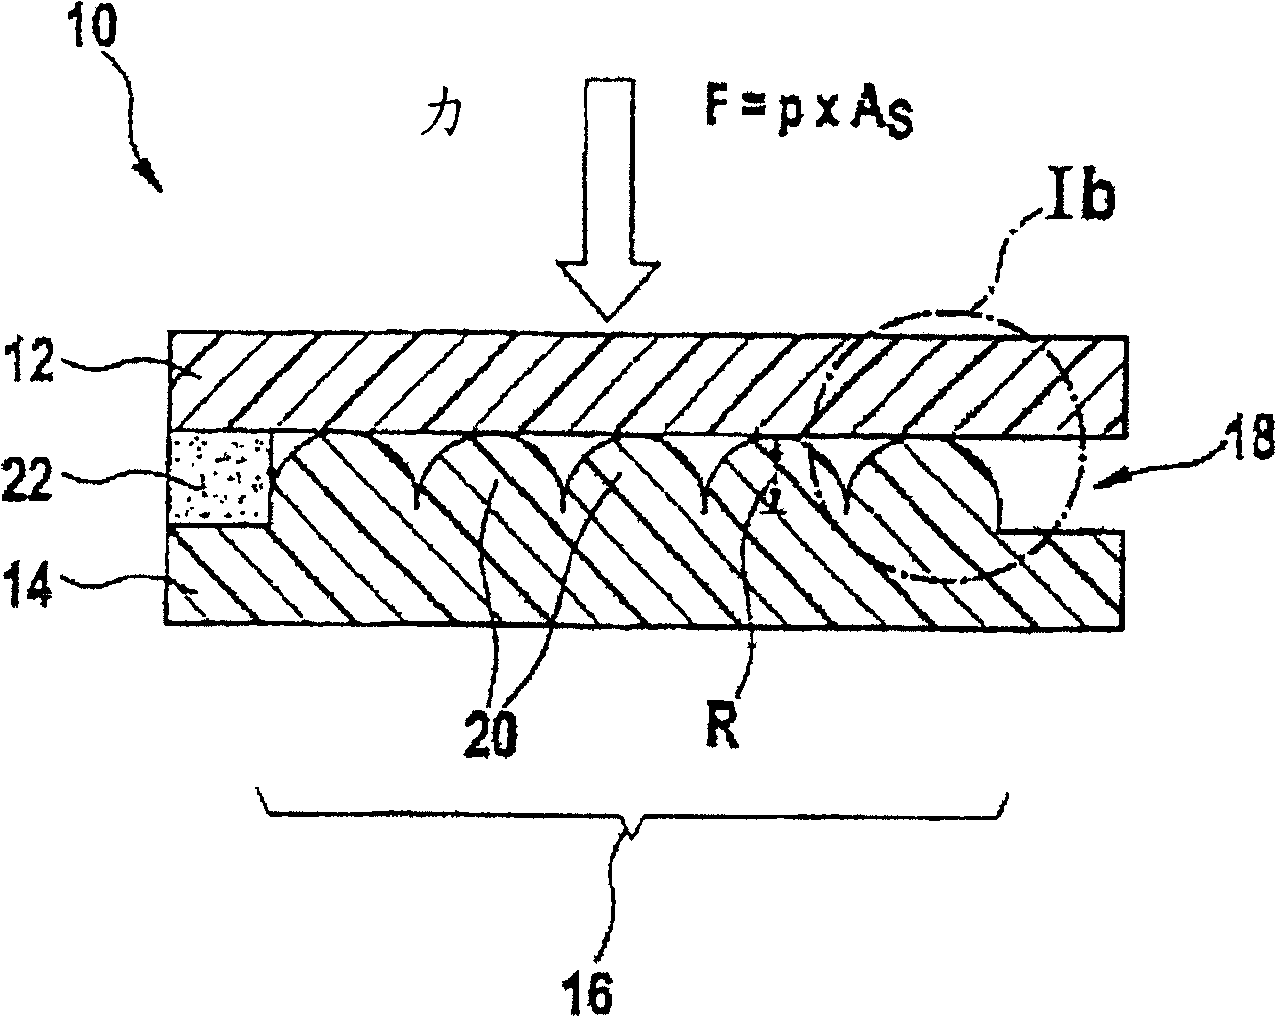 Pressure sensor comprising an elastic sensor layer with a microstructured surface